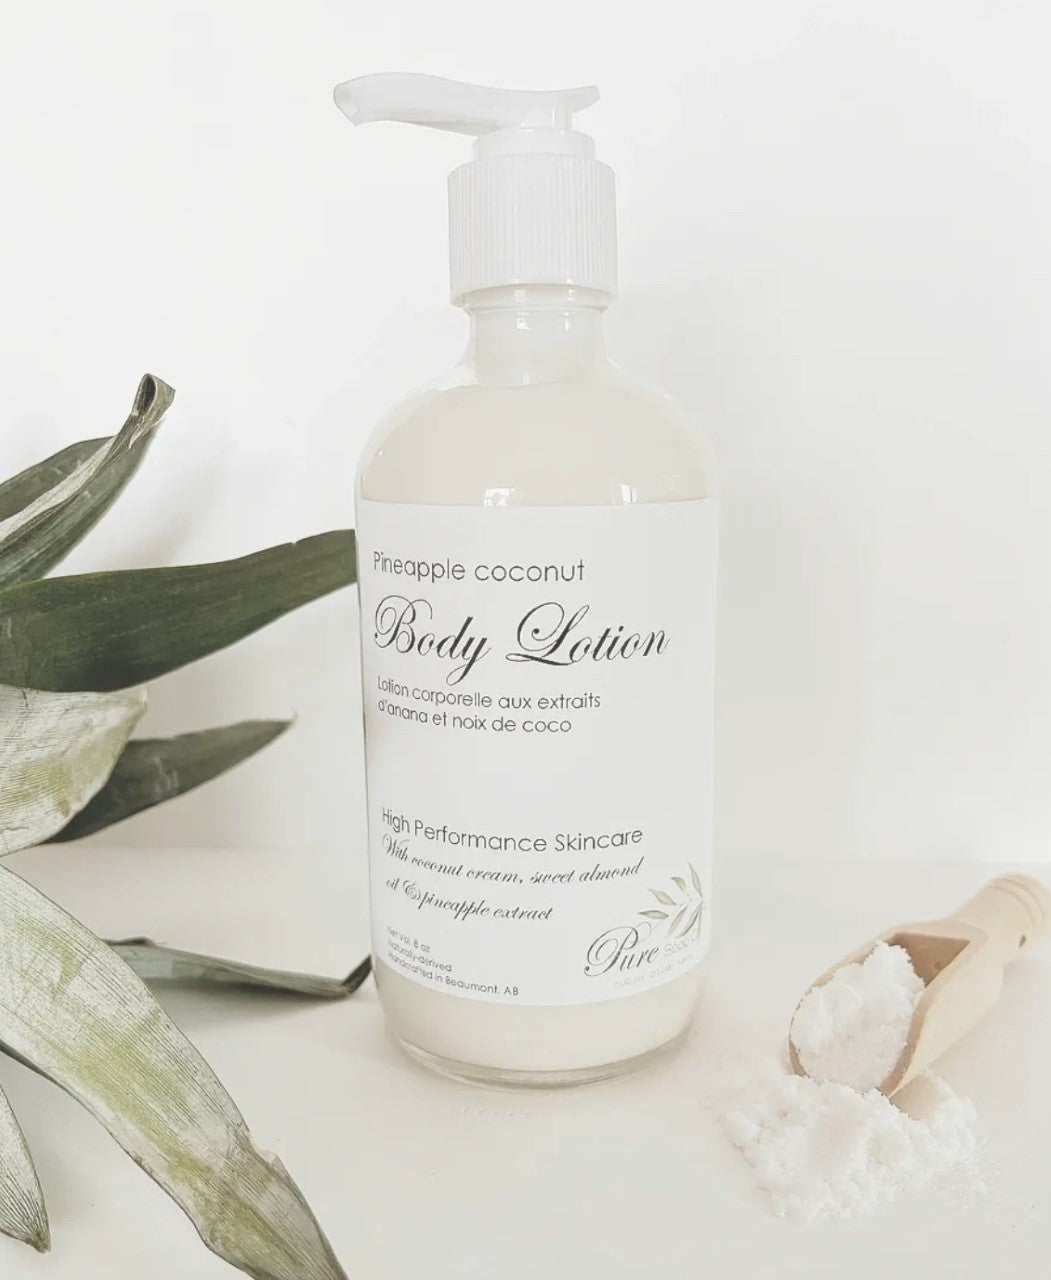 Pineapple Coconut Body Lotion